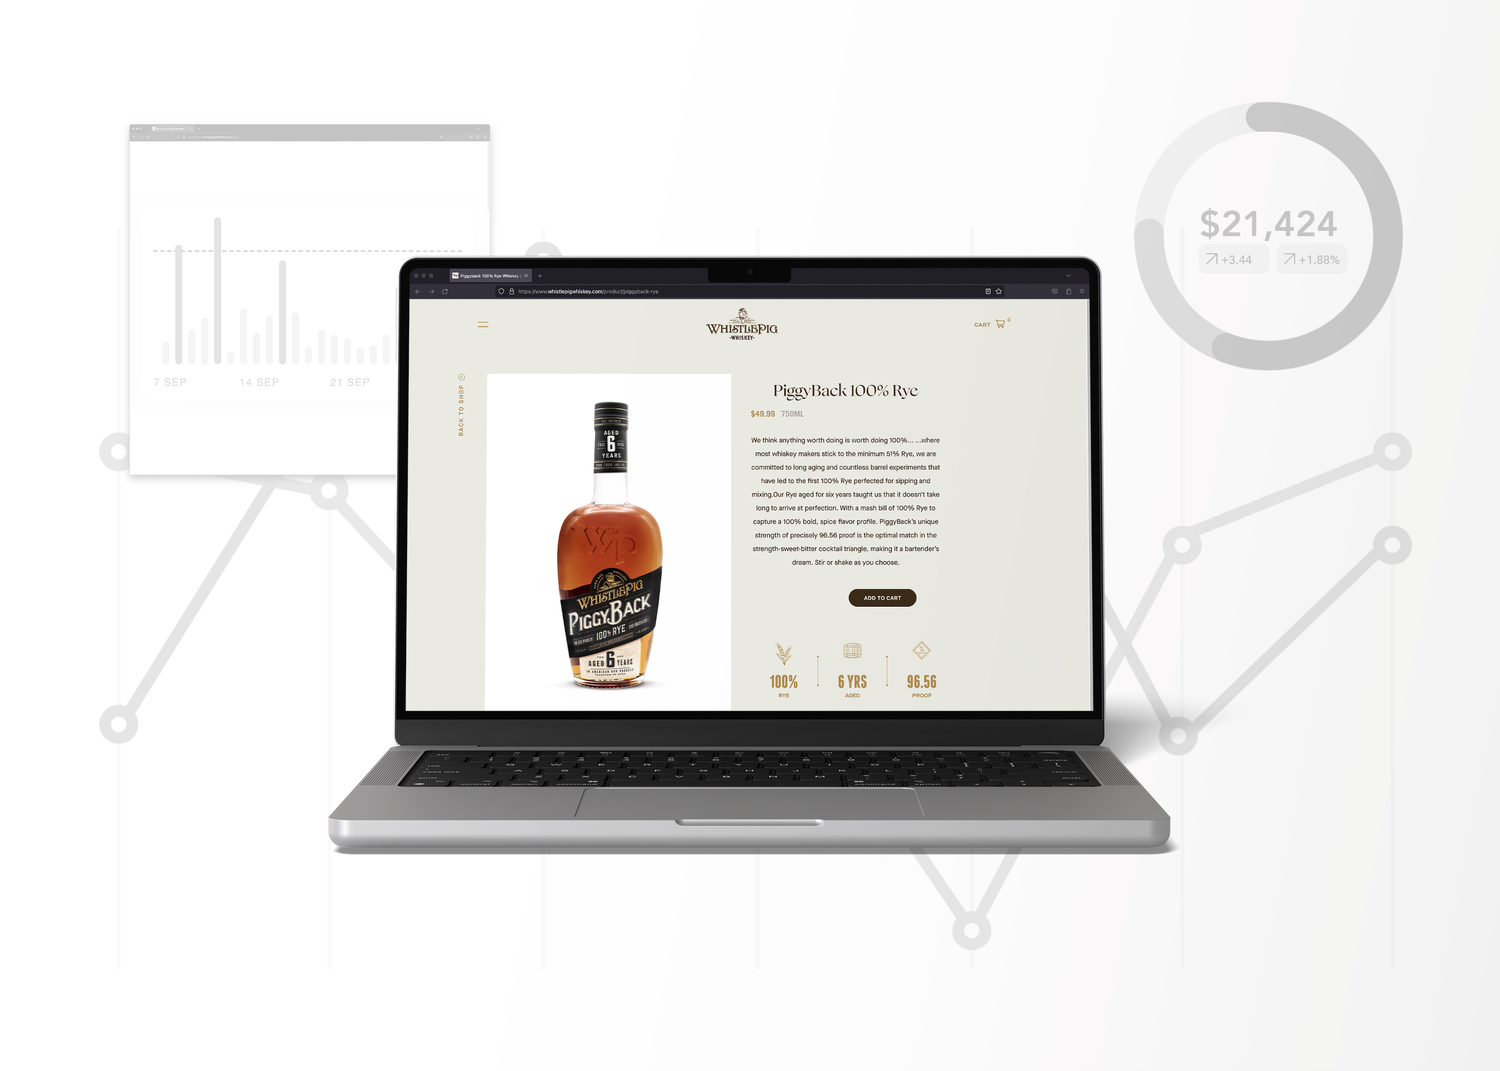 Laptop with WhistlePig Whiskey product detail page displayed in a web browser.